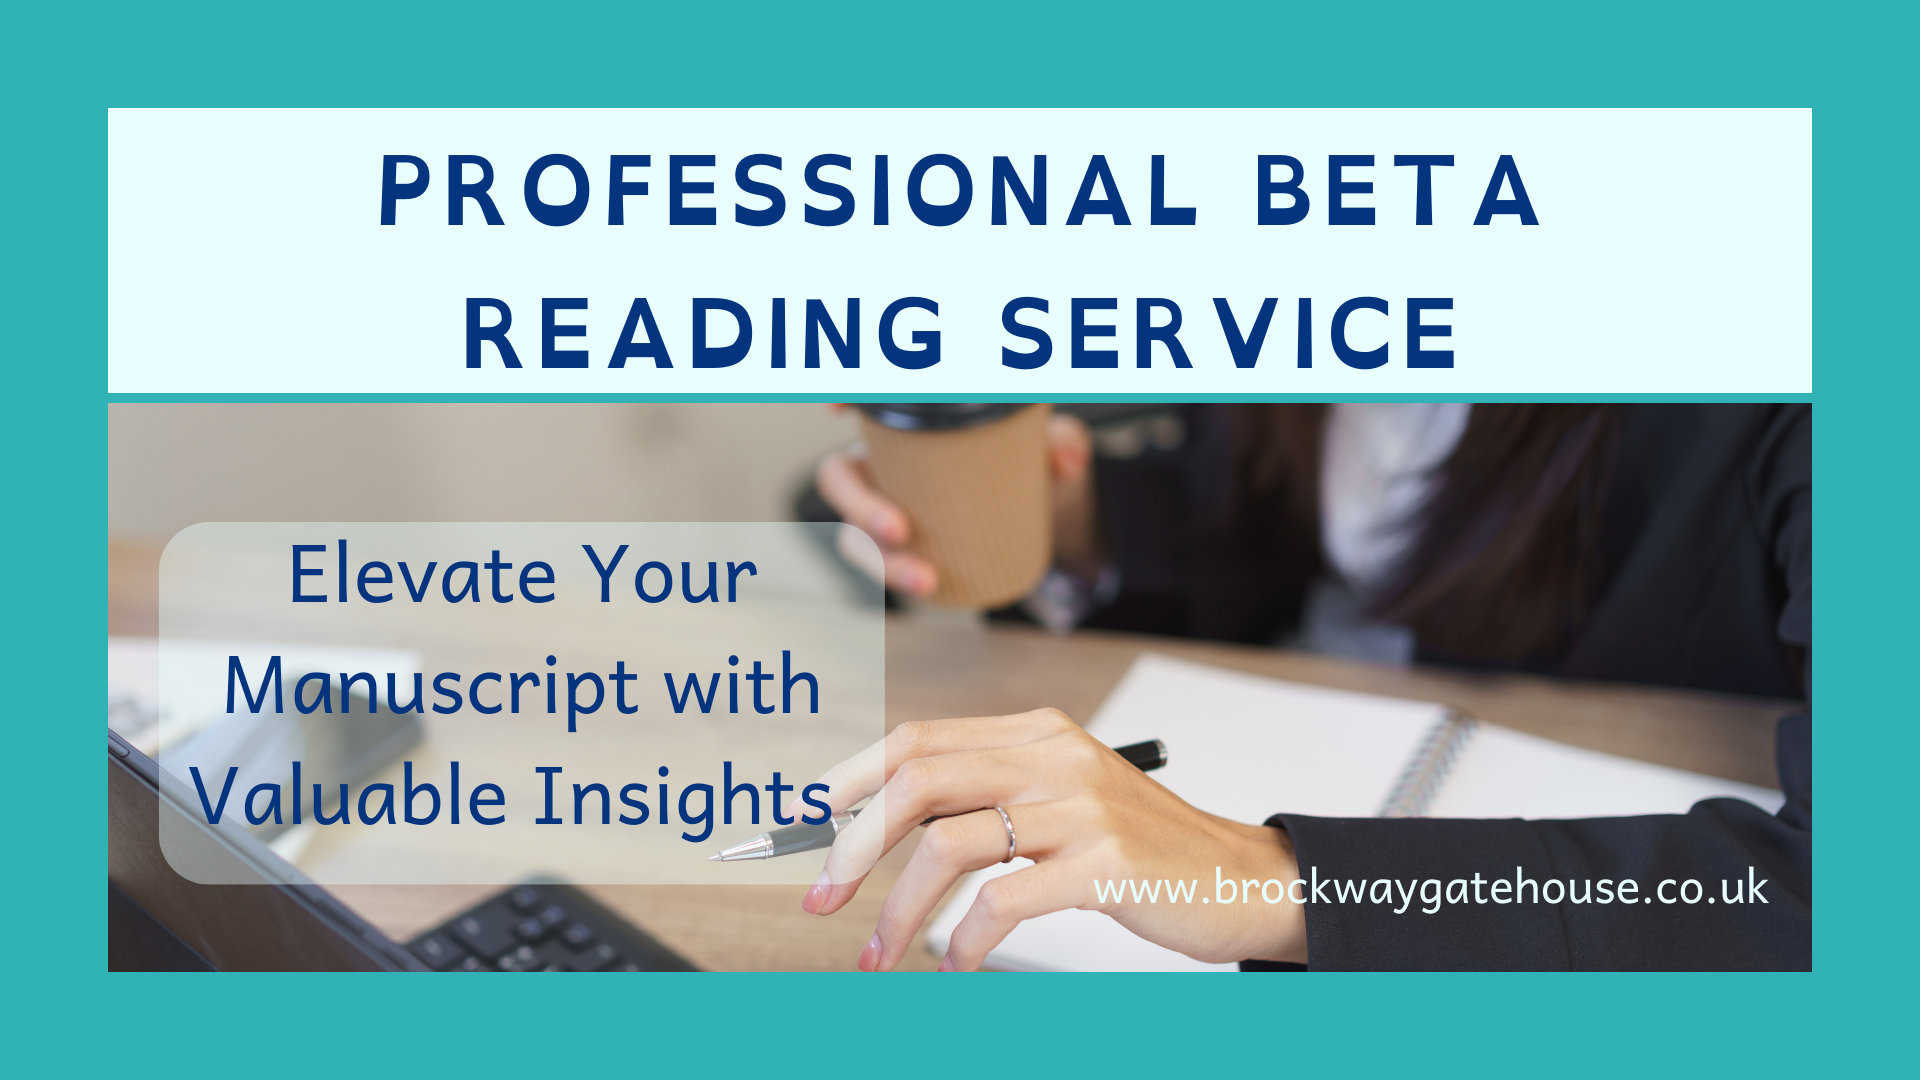 Professional Beta Reading Service_ Elevate Your Manuscript with Valuable Insights